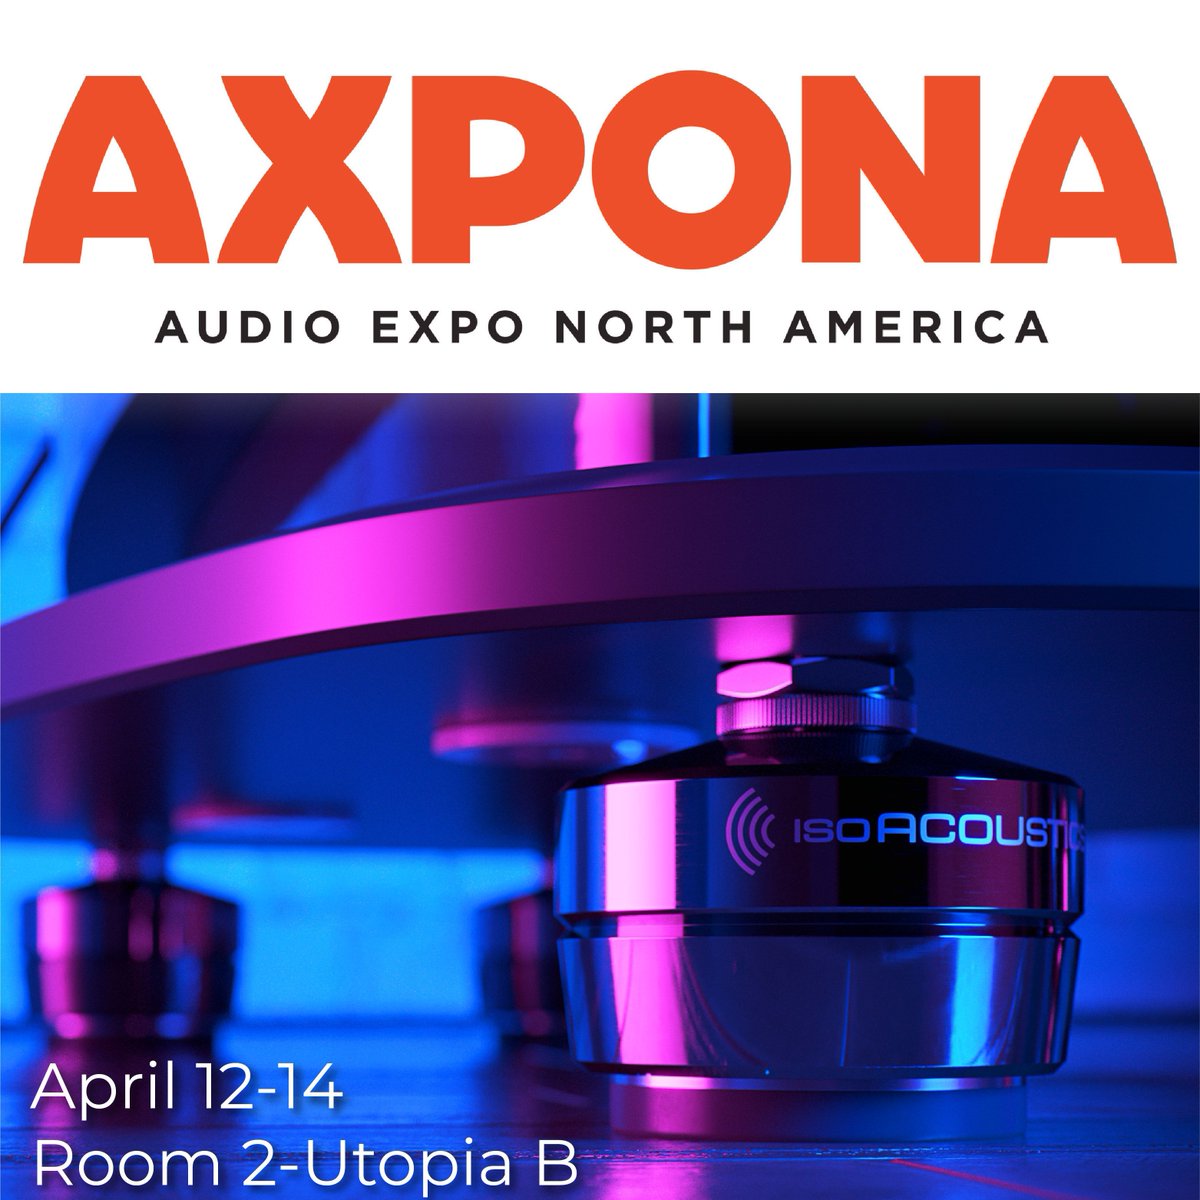 🎶 We're live at #AXPONA! Join us in Room 2- Utopia B at the Renaissance Schaumburg, April 12-14. Experience our A/B Demo: IsoAcoustics vs. traditional spikes with Focal & Naim. 🎧✨ #IsoAcoustics #FocalSpeakers #Naim #HiFi #SoundRevolution #AXPONA24 #AXPONA